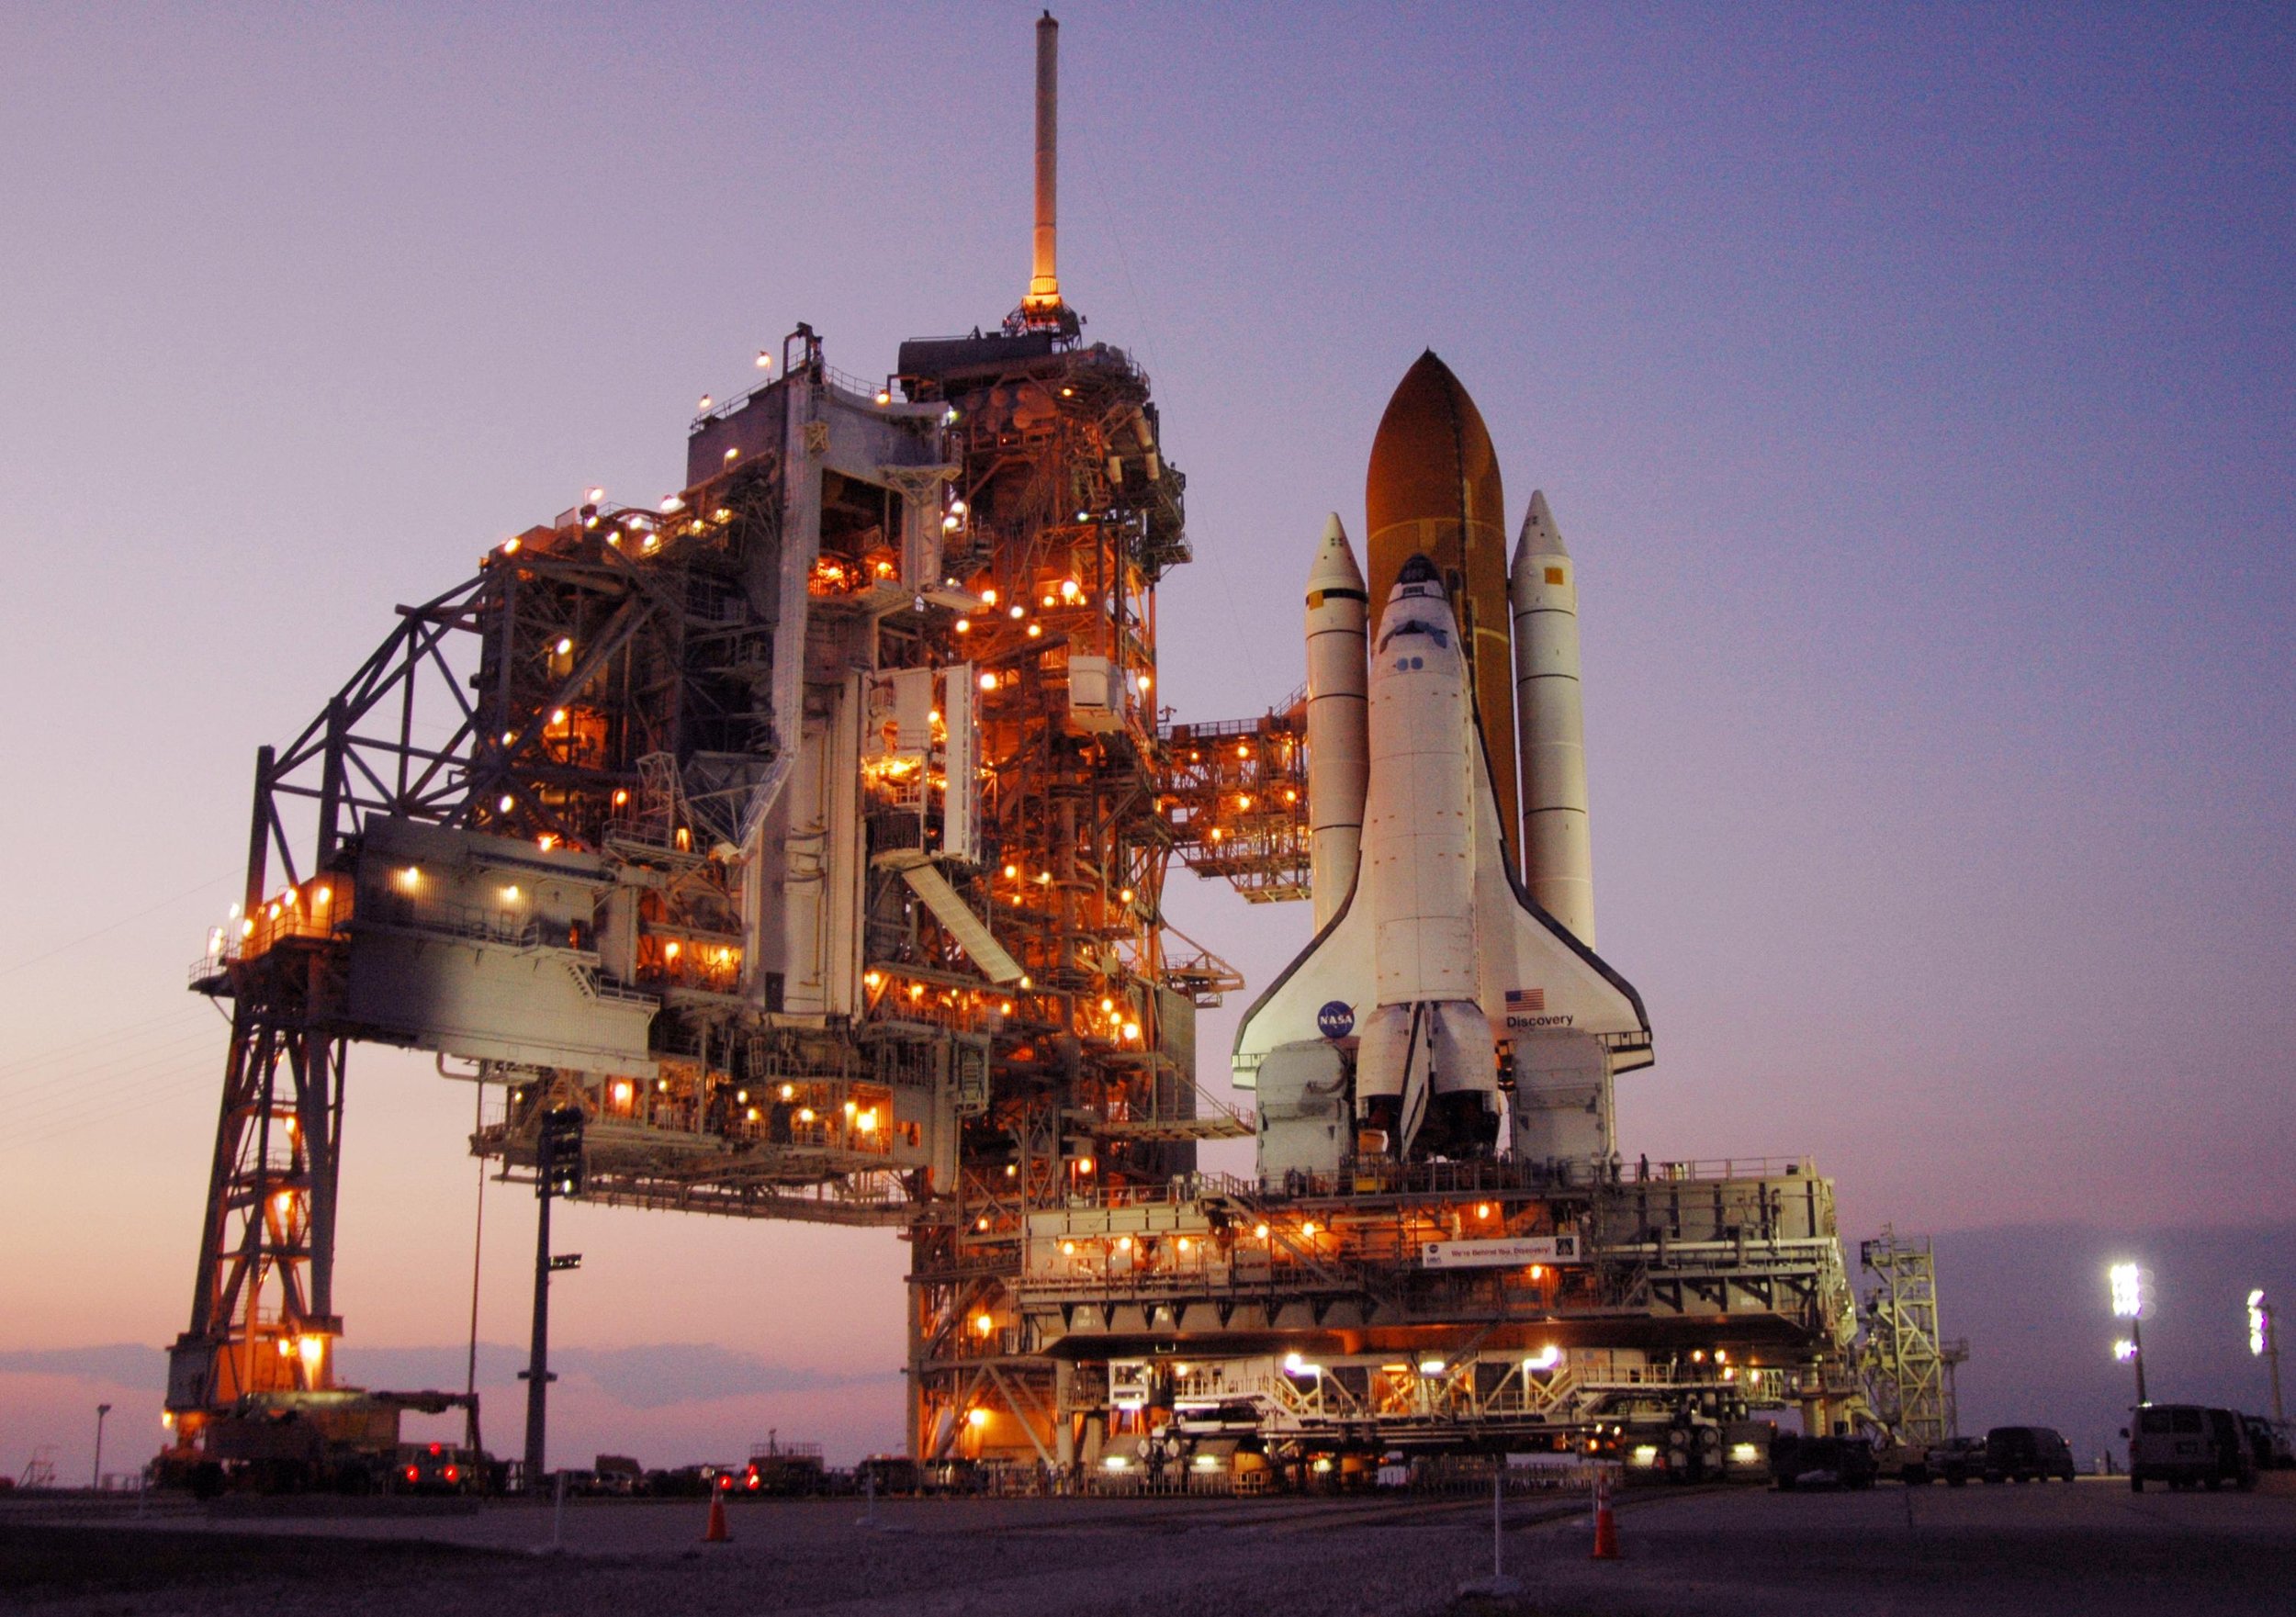 Space_Shuttle_Discovery_rests_on_the_hardstand_of_Launch_Pad_39B_at_NASA's_Kennedy_Space_Center.jpg